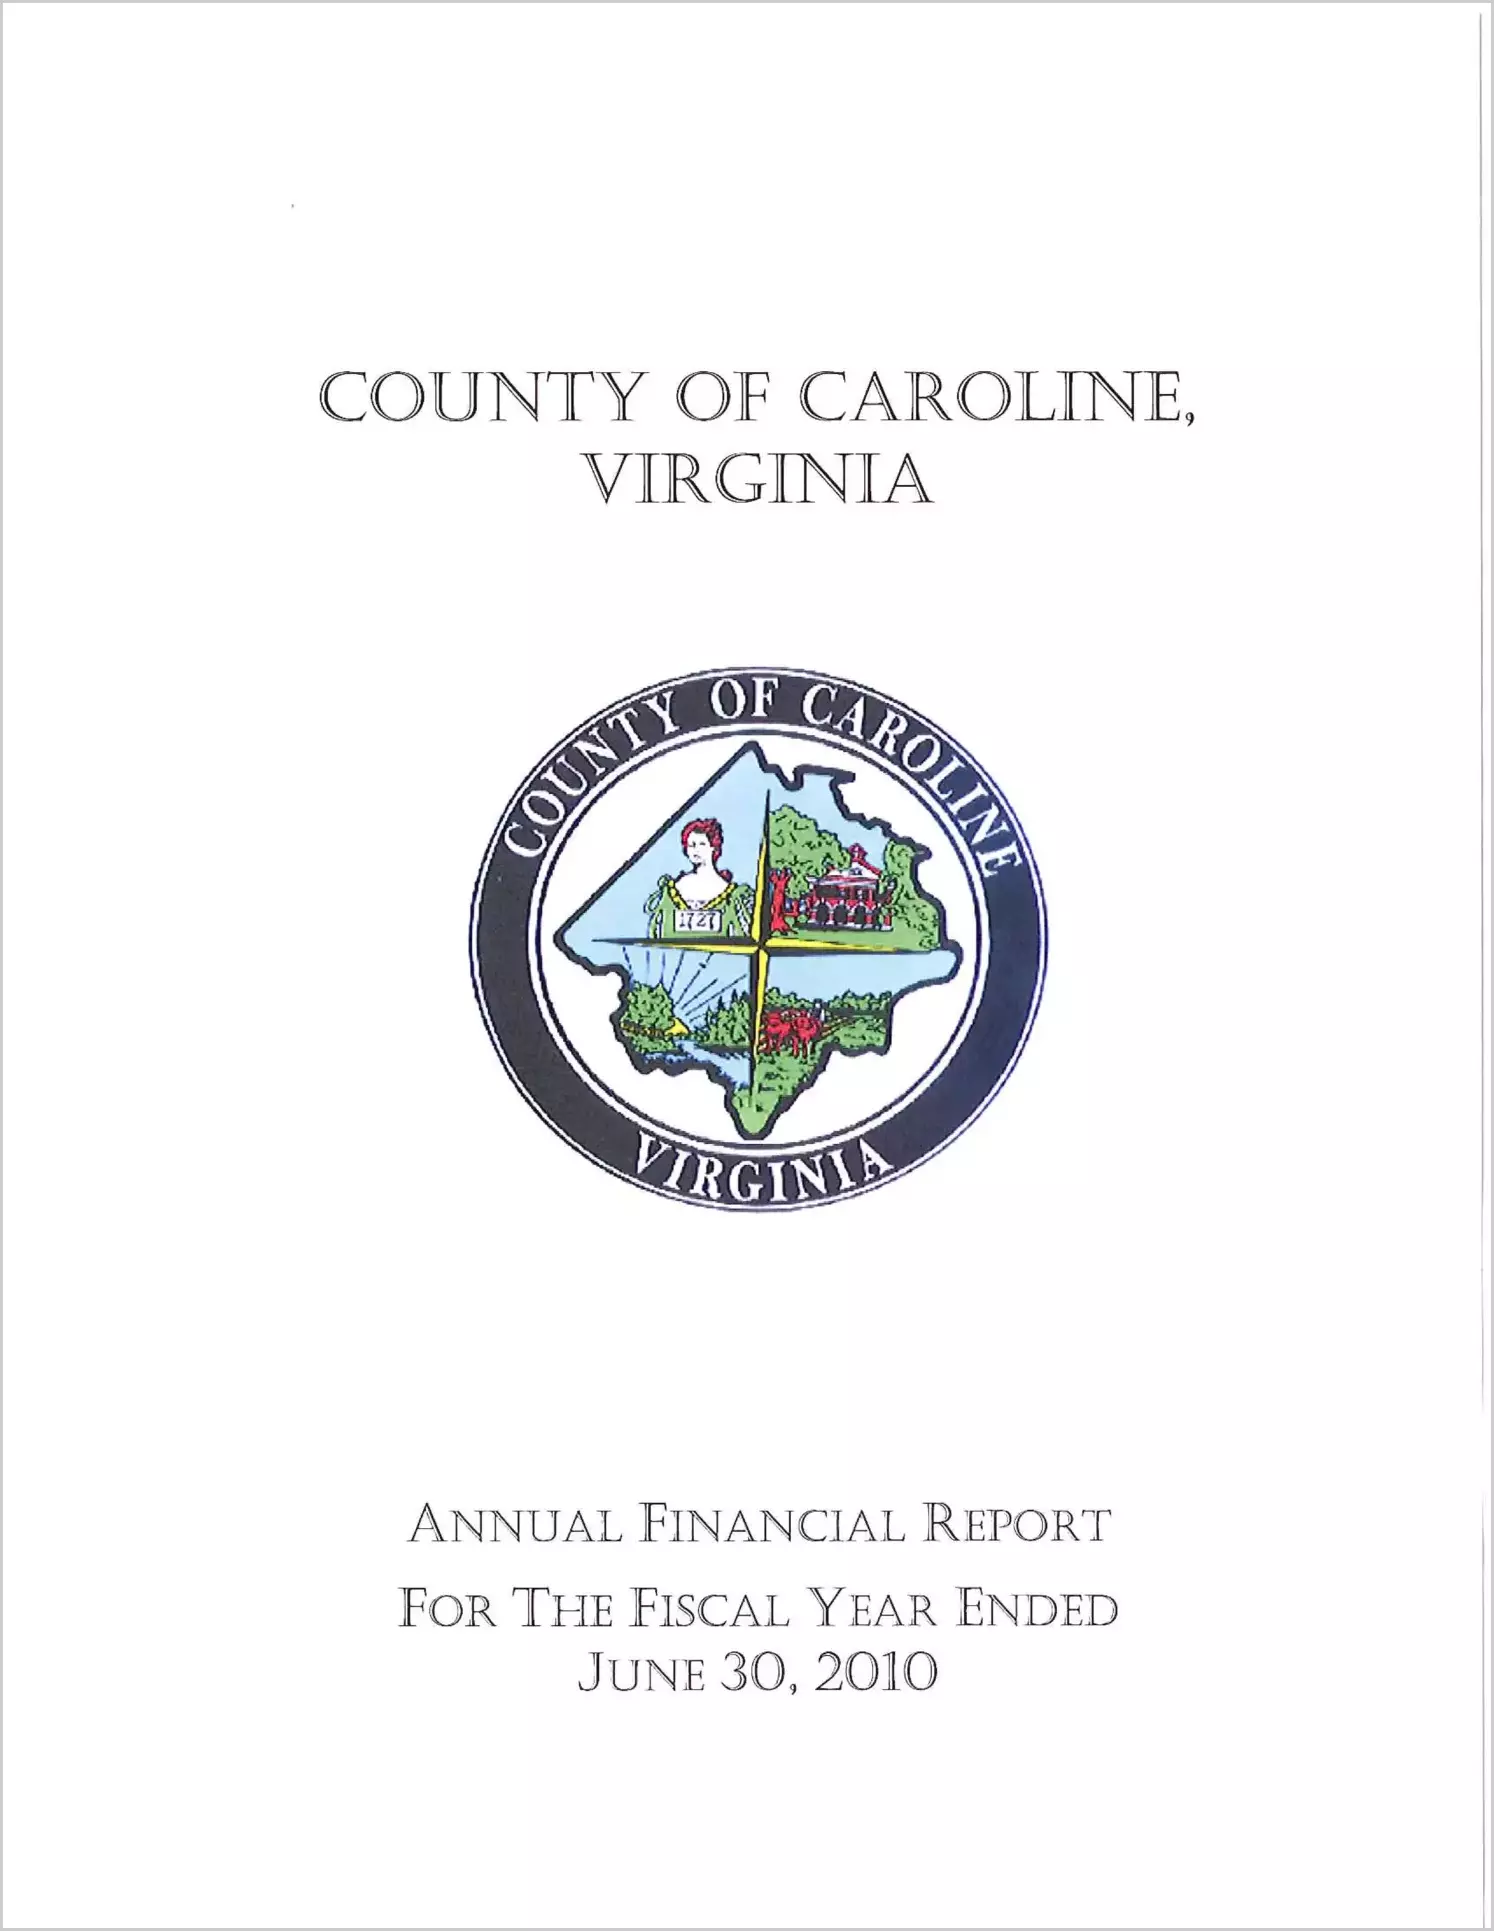 2010 Annual Financial Report for County of Caroline